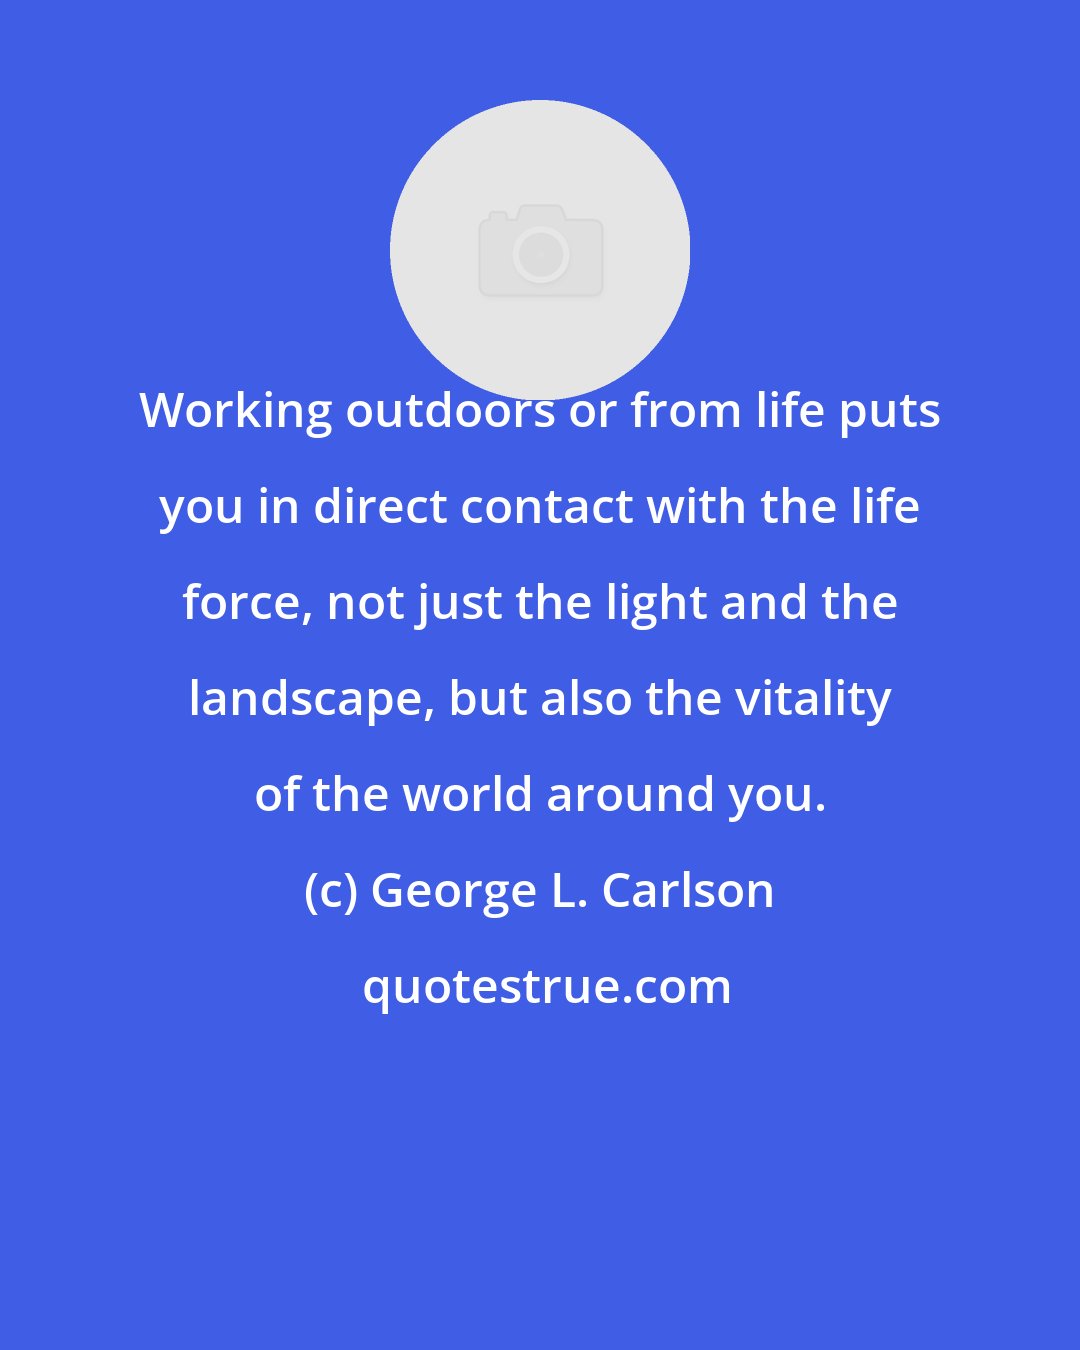 George L. Carlson: Working outdoors or from life puts you in direct contact with the life force, not just the light and the landscape, but also the vitality of the world around you.